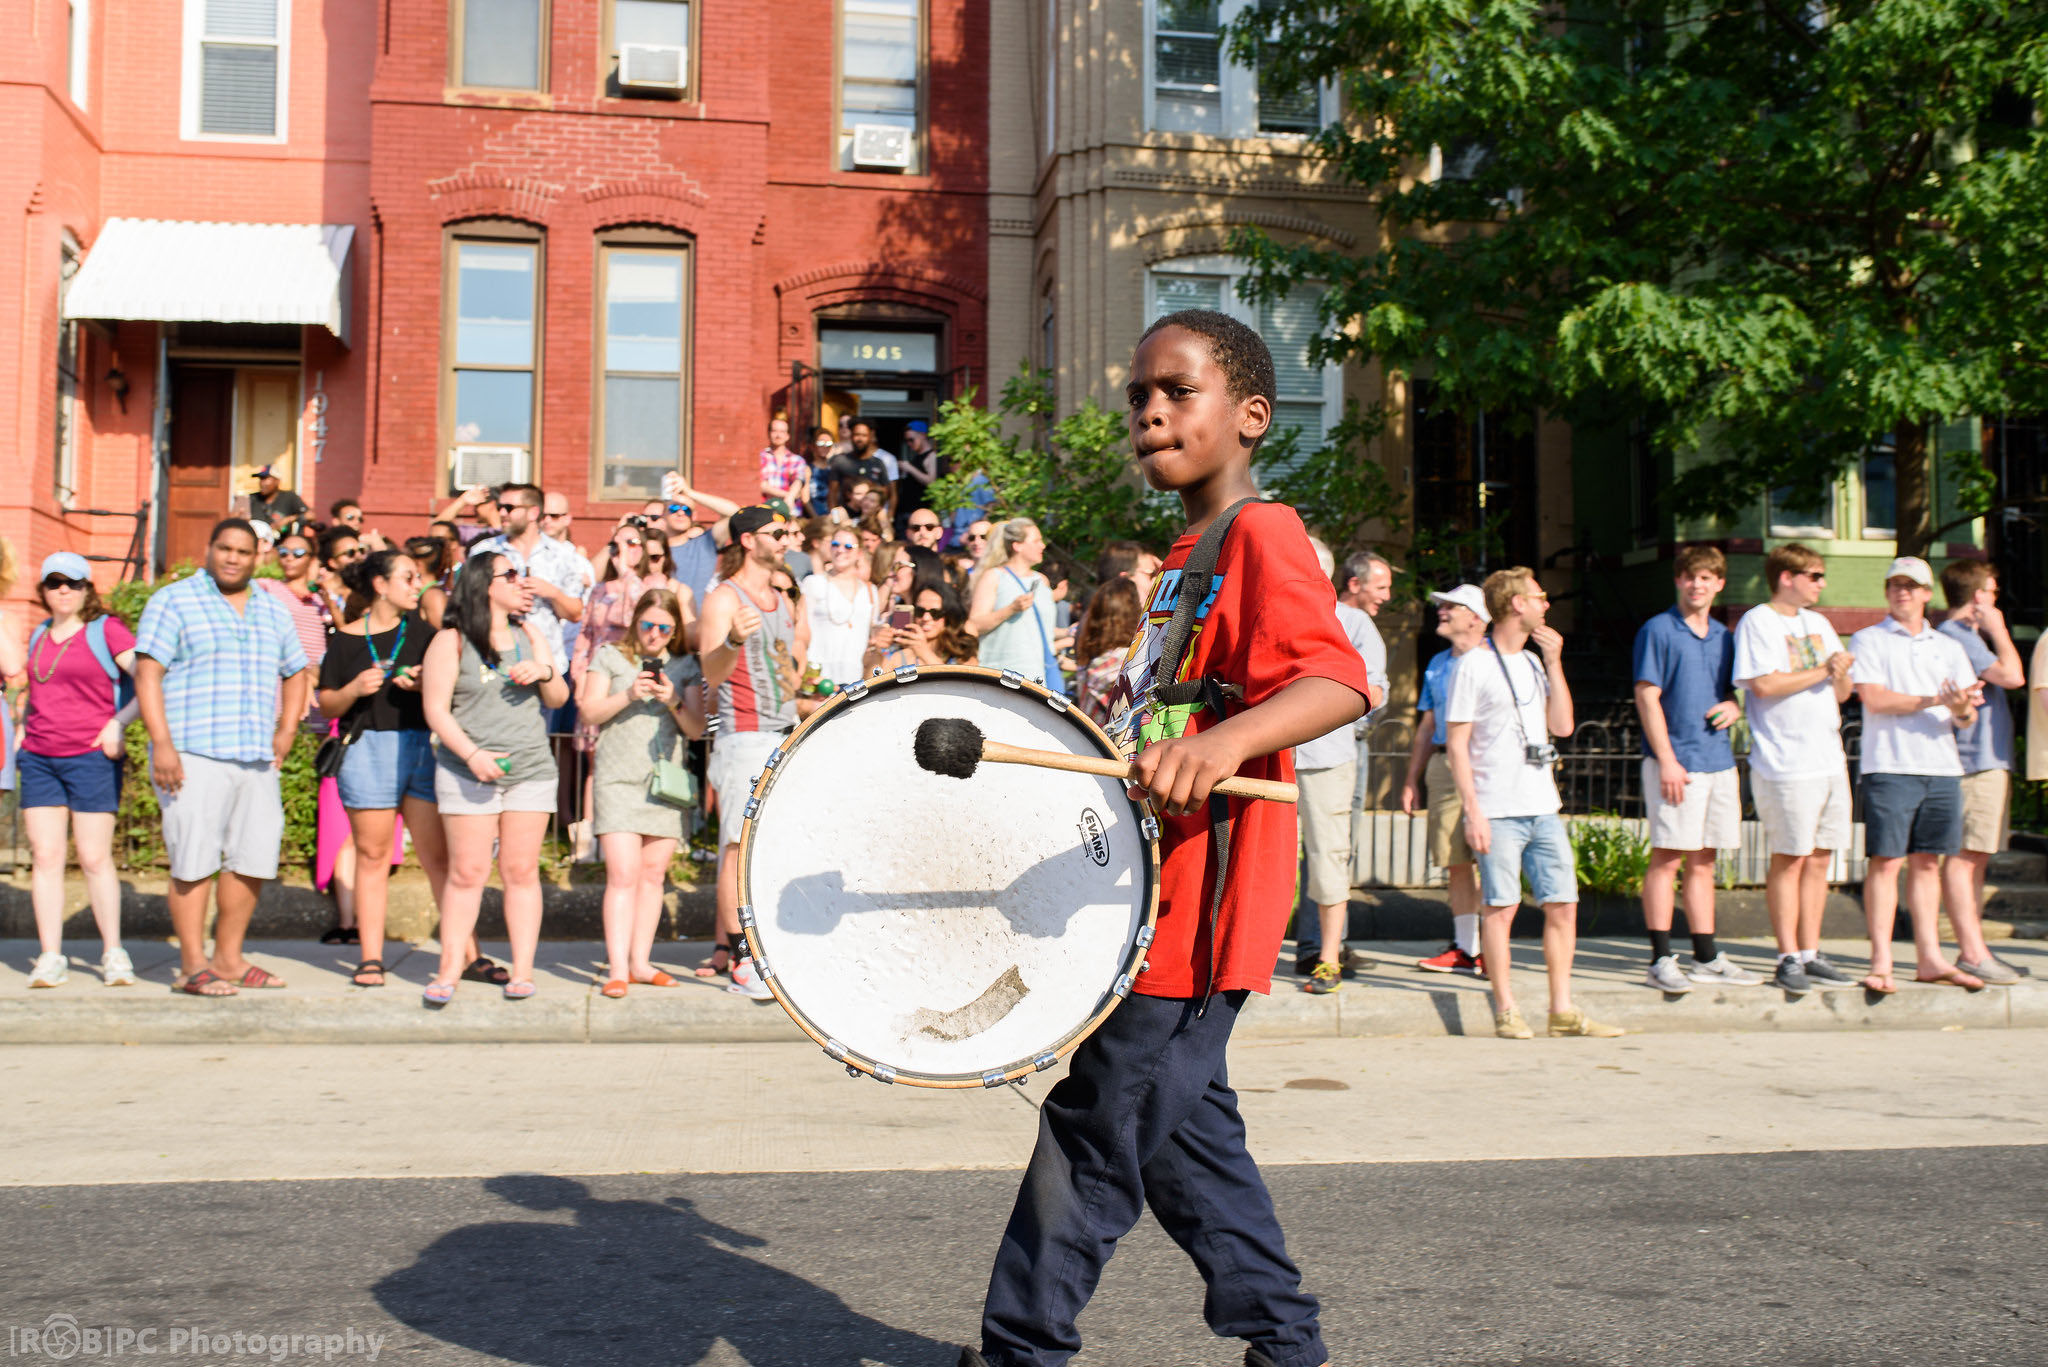 Funk Parade brings music and more to a historic area of DC | WTOP News